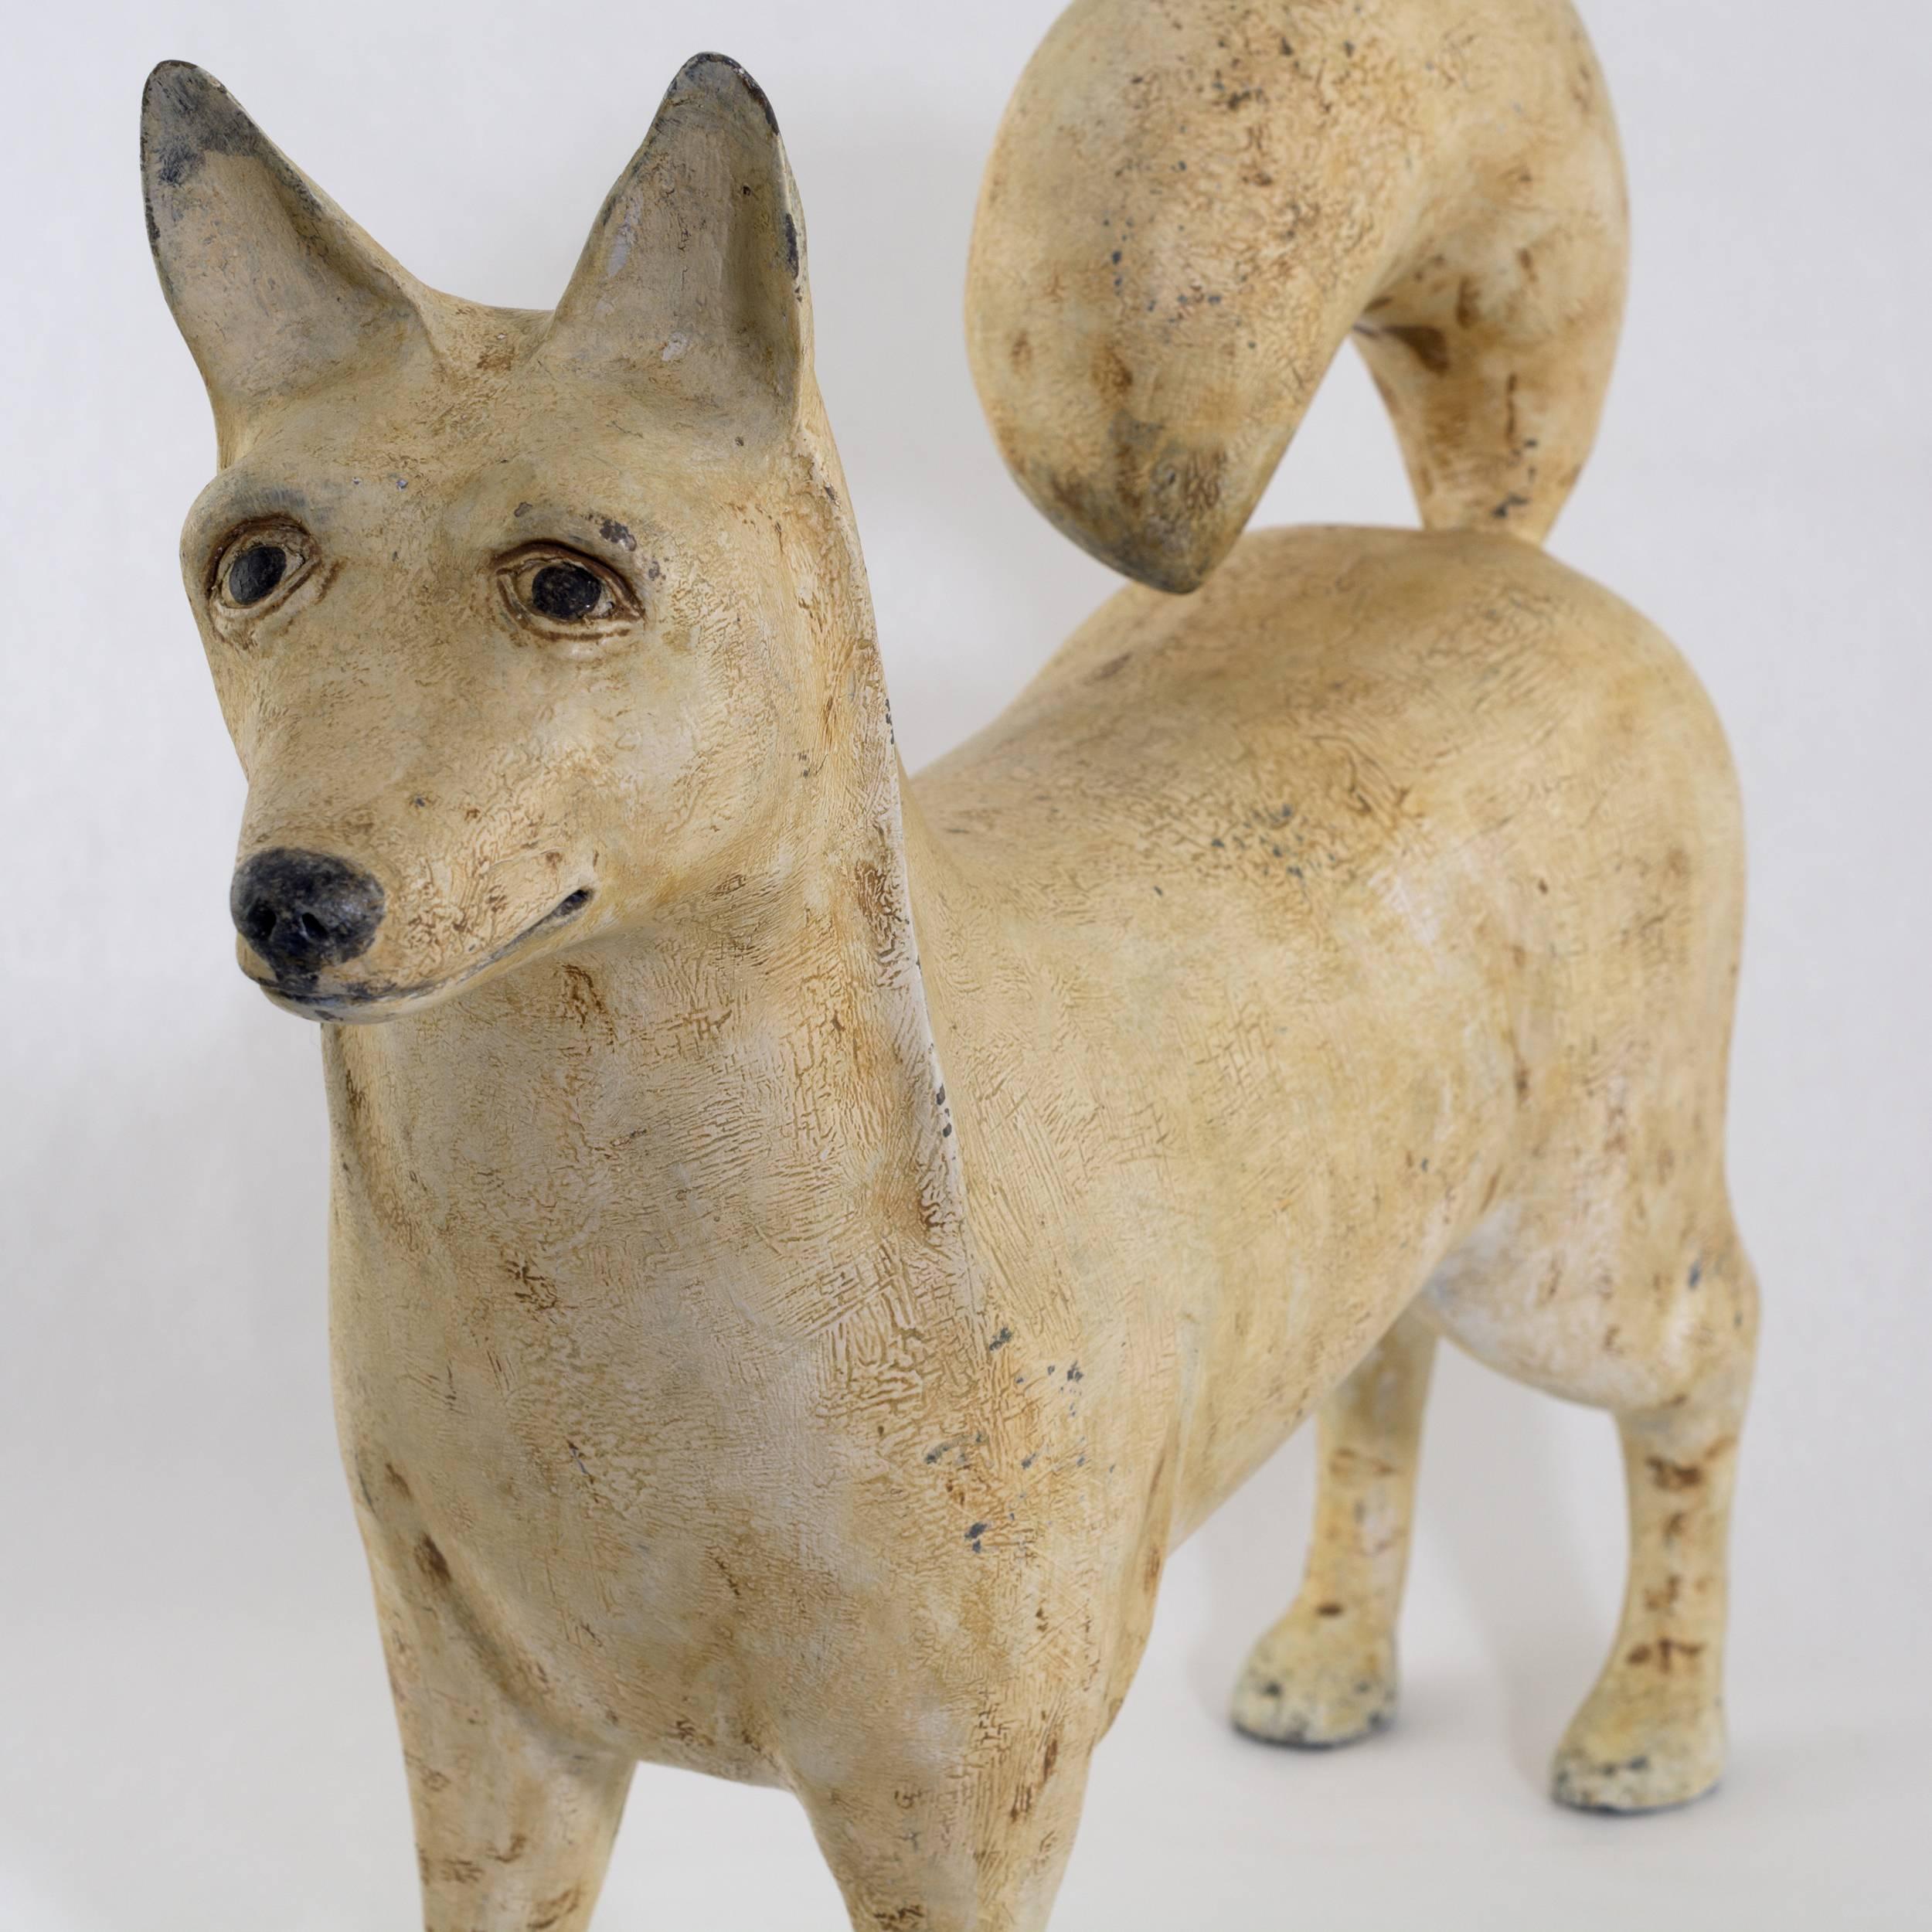 Folk Art dog carved and painted from pine
Having an appealing aged surface
Measure: 16